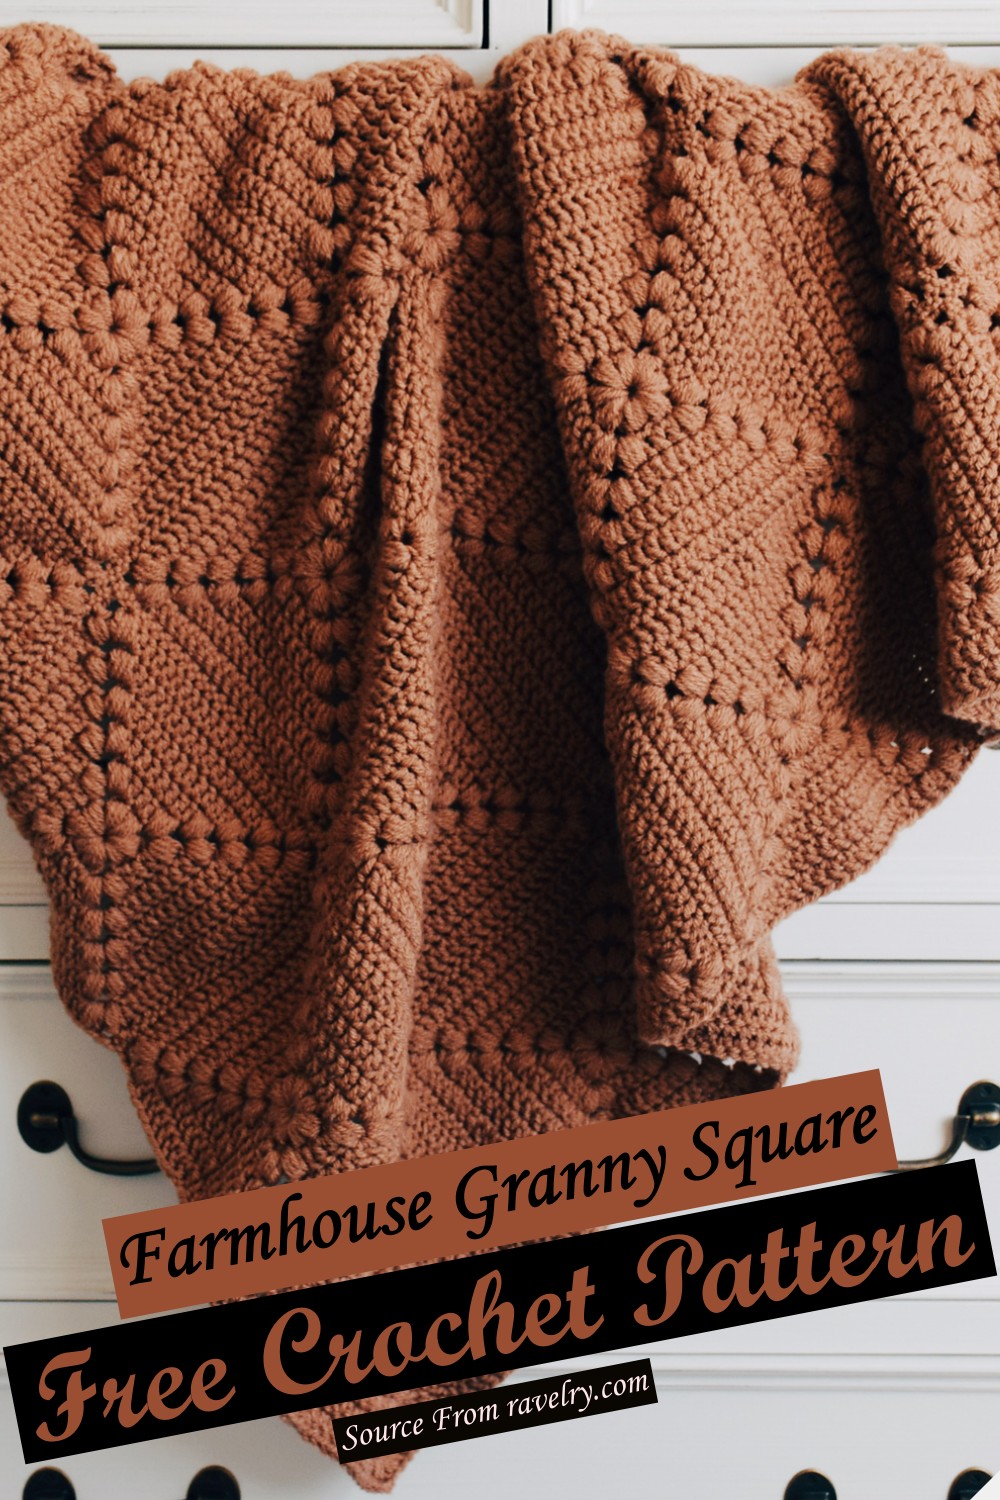 Colourful Free Crochet Square Patterns